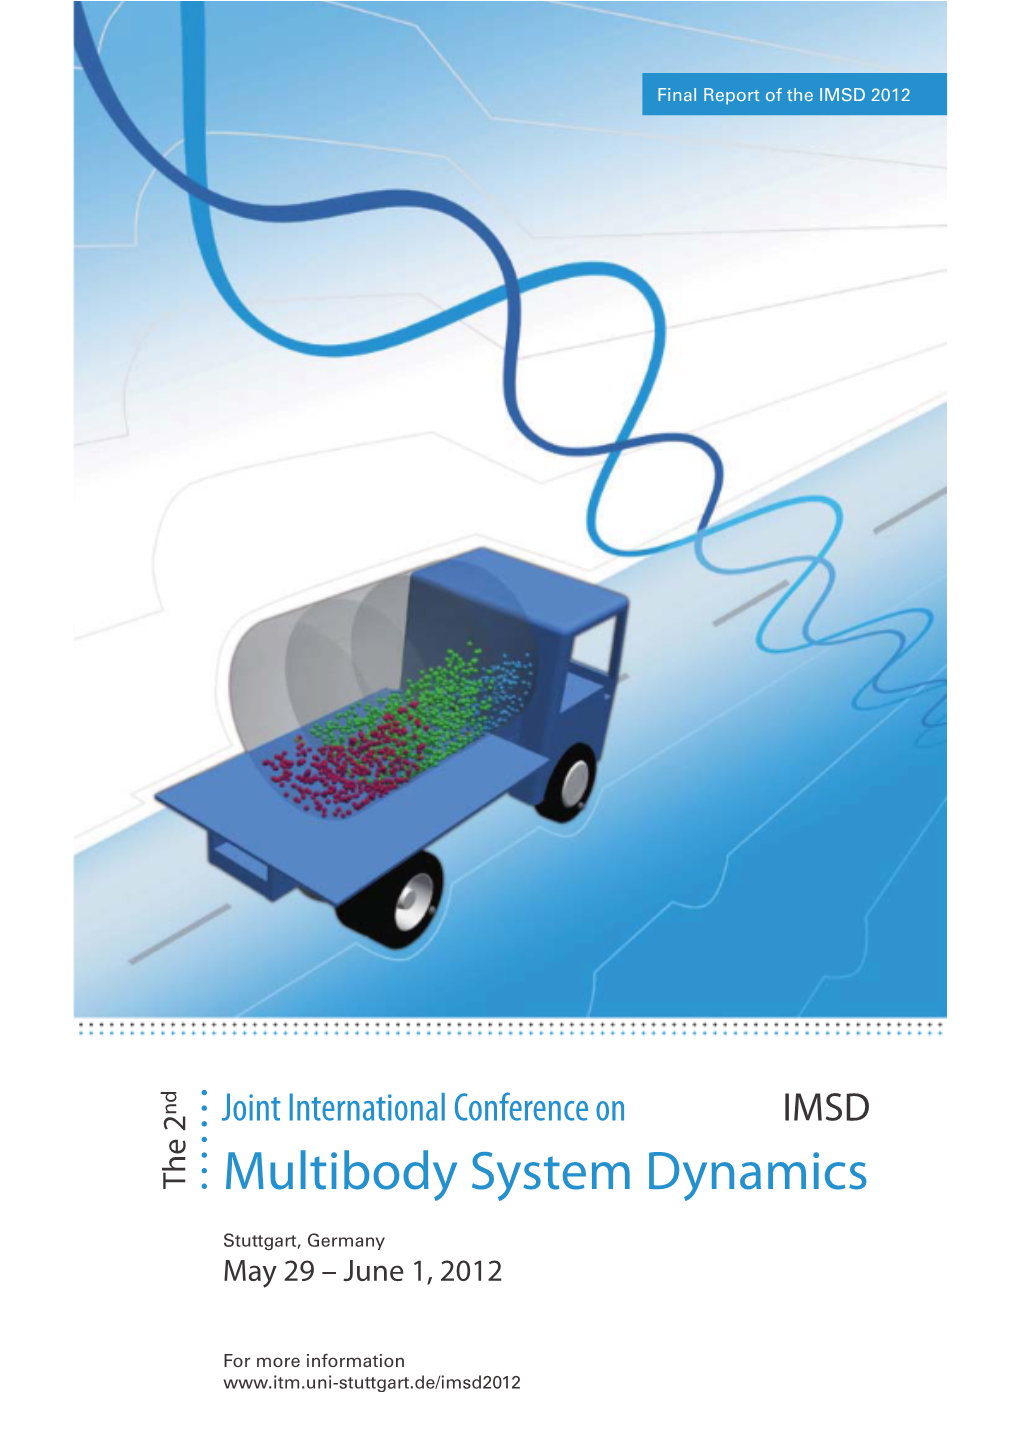 Multibody System Dynamics (IMSD) Was Held at the Institute of Engineering and Computational Mechanics at the University of Stuttgart, Germany in May 29 - June 1, 2012